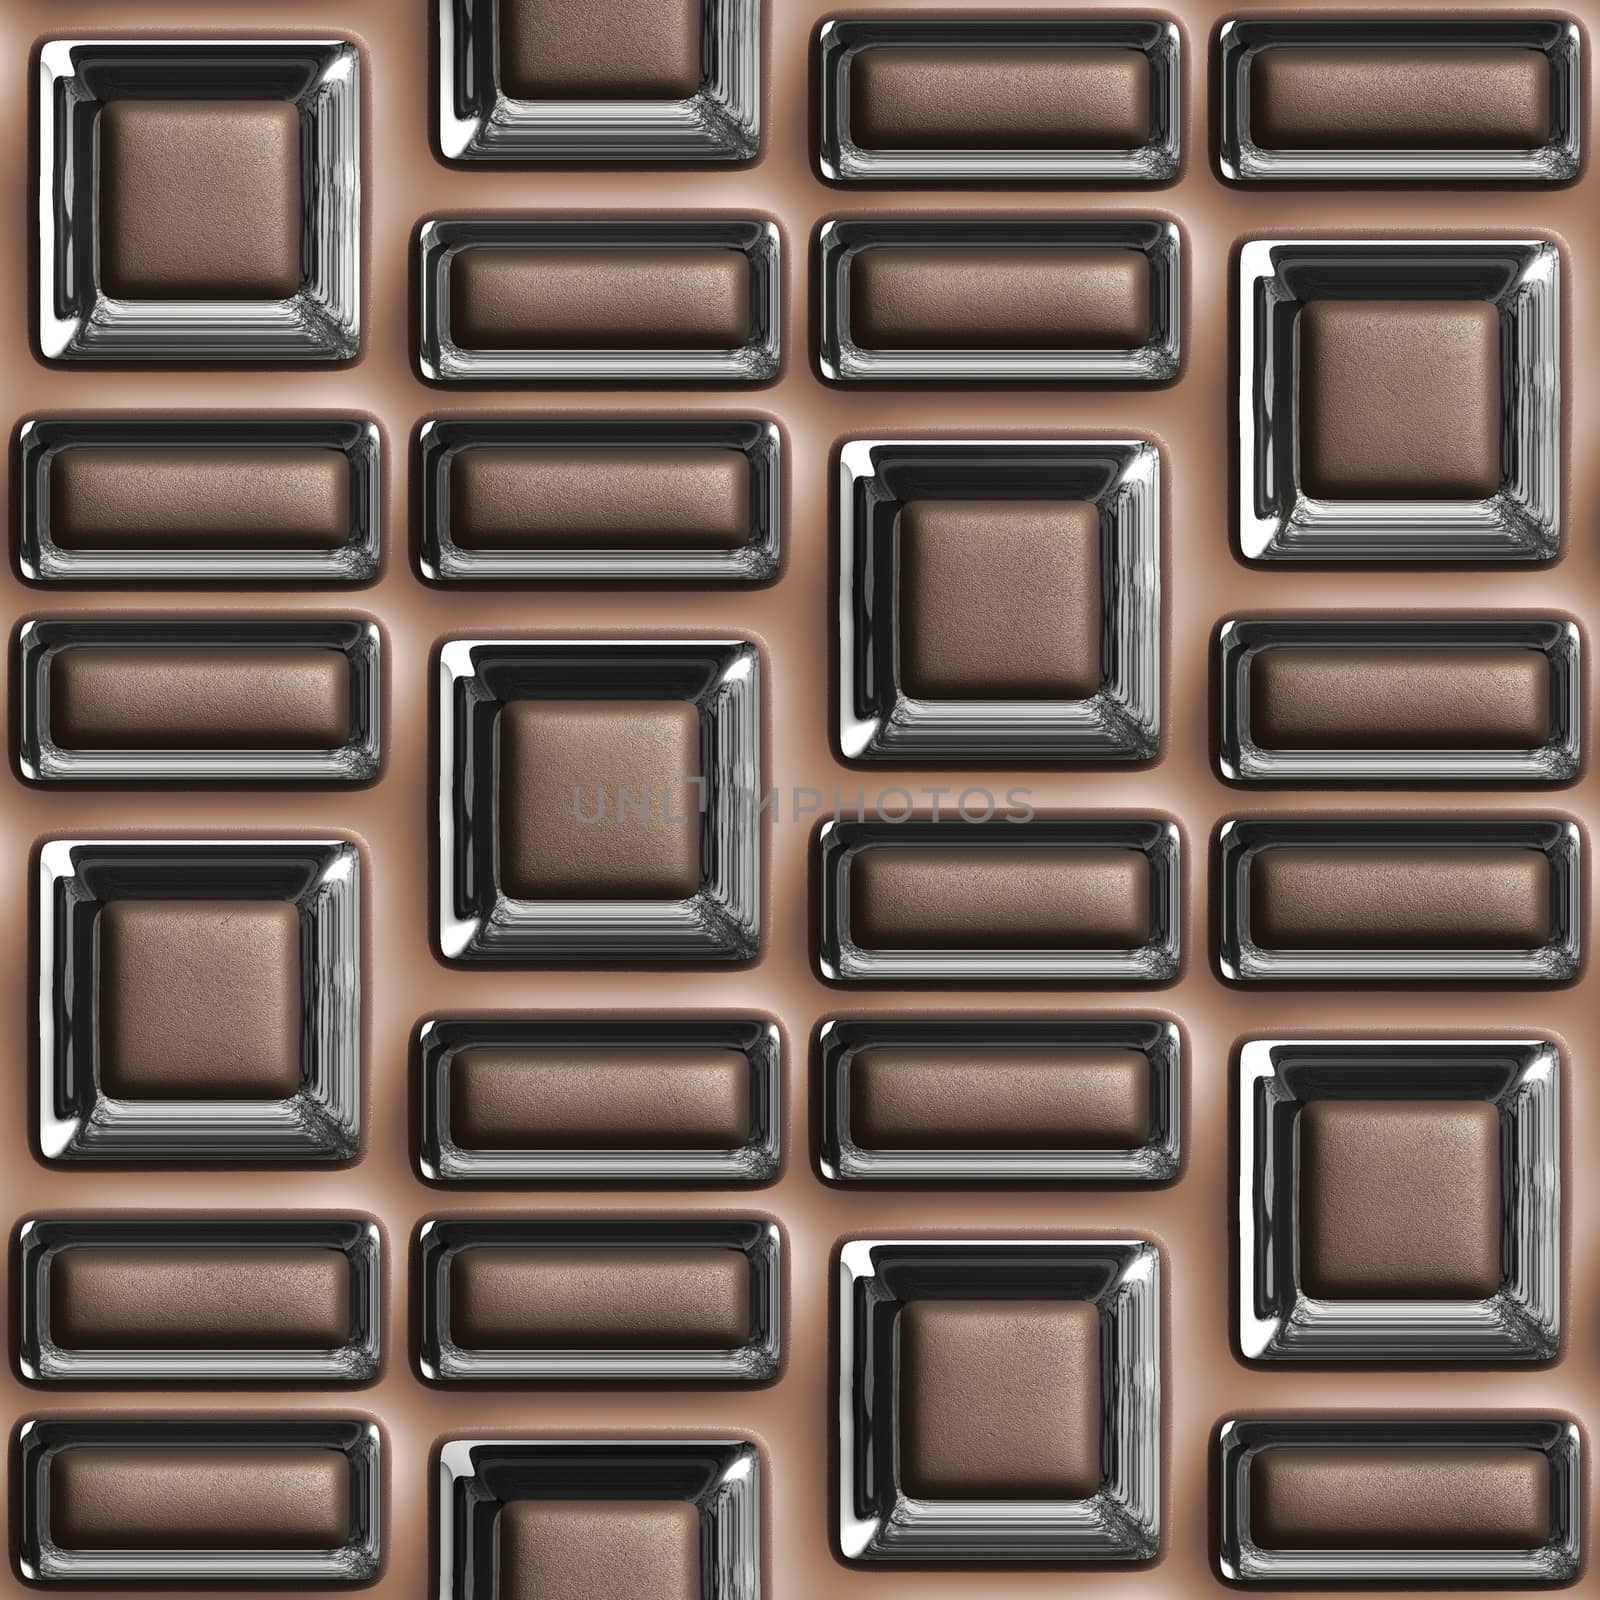 brown and glass seamless tileable decorative background pattern